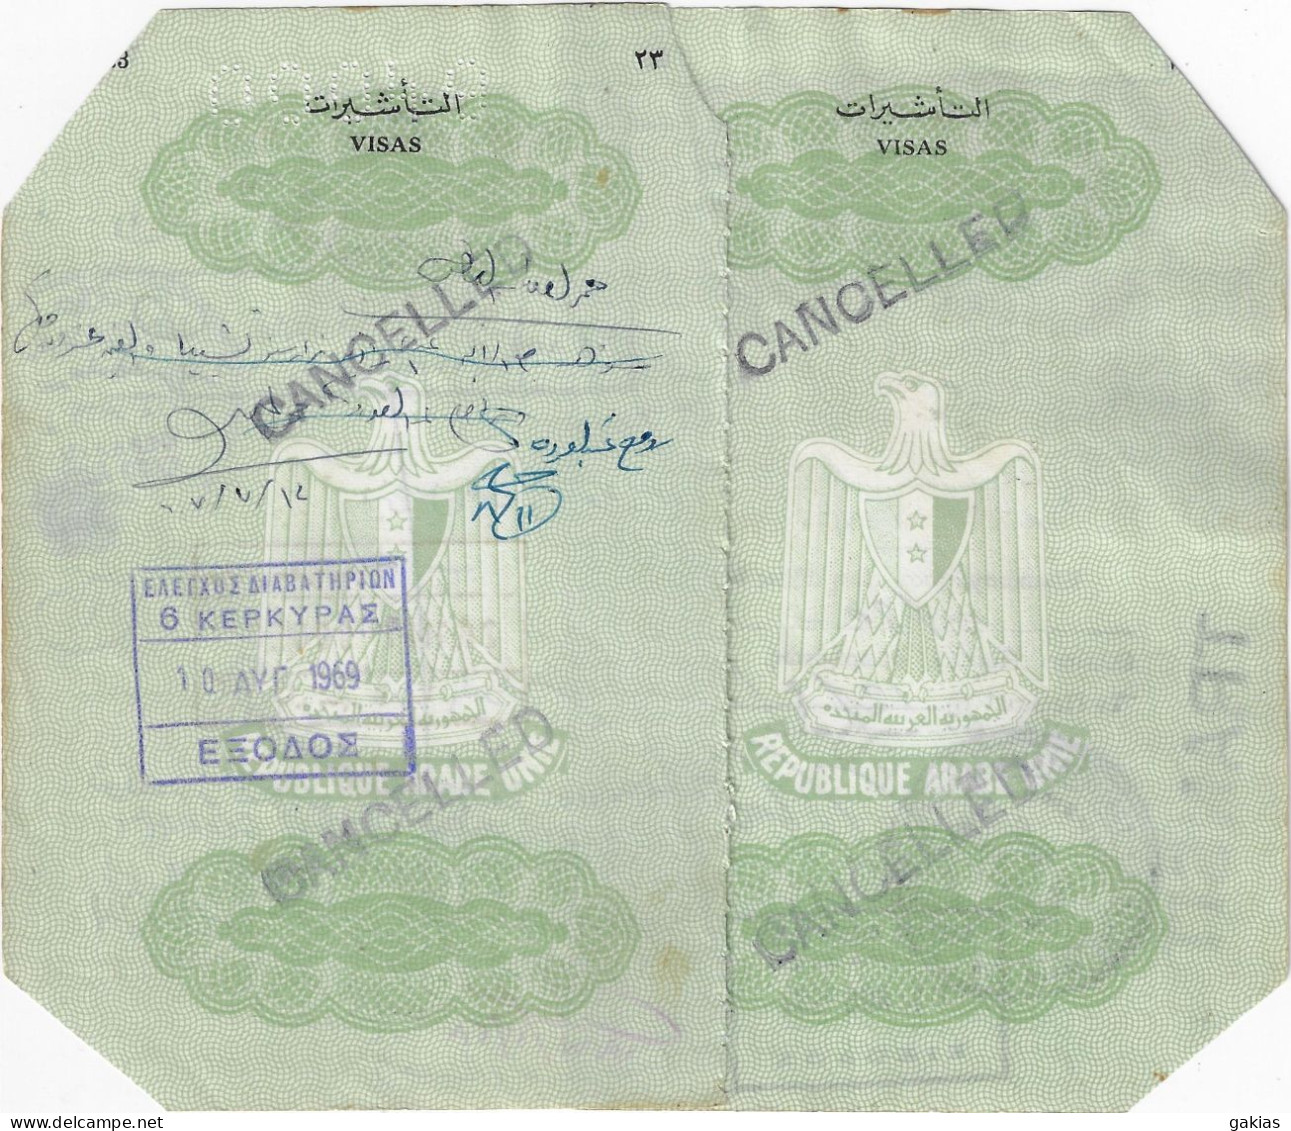 GREECE 1969, EGYPT, FISCAL STAMPS On 2 Passport Leaves. - Revenue Stamps